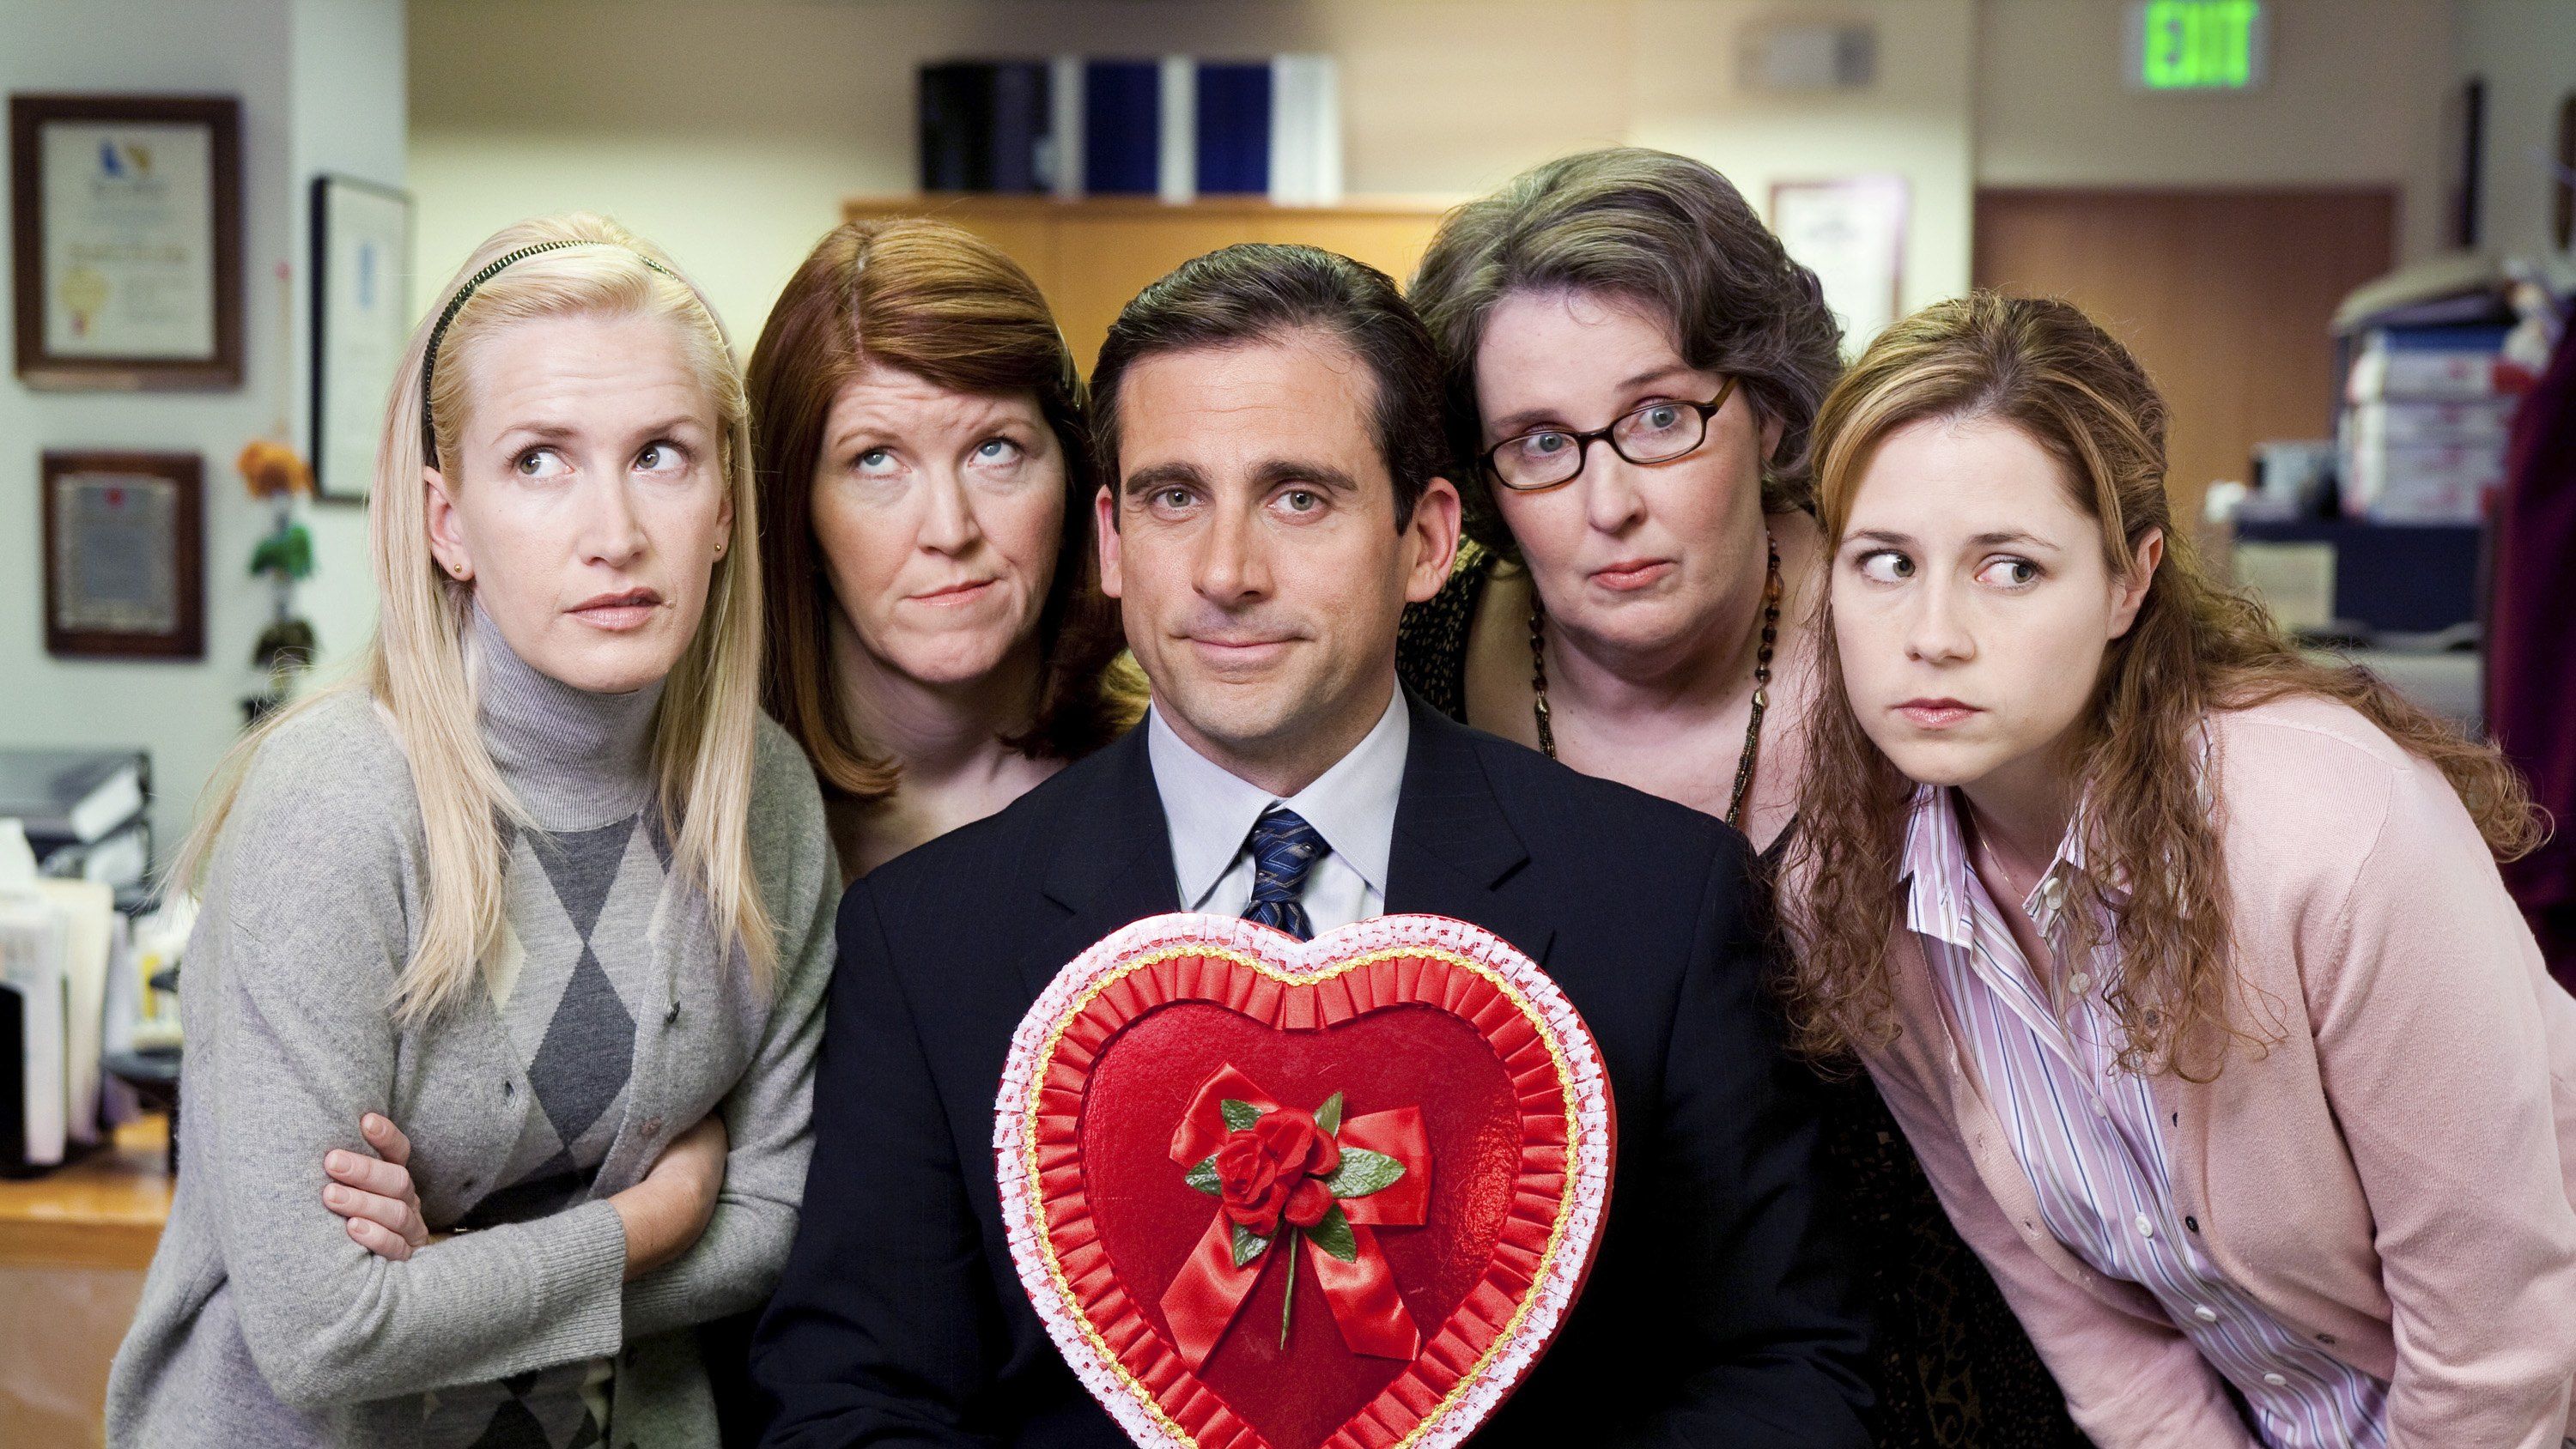 Why The Office cast chose to end show at season 9